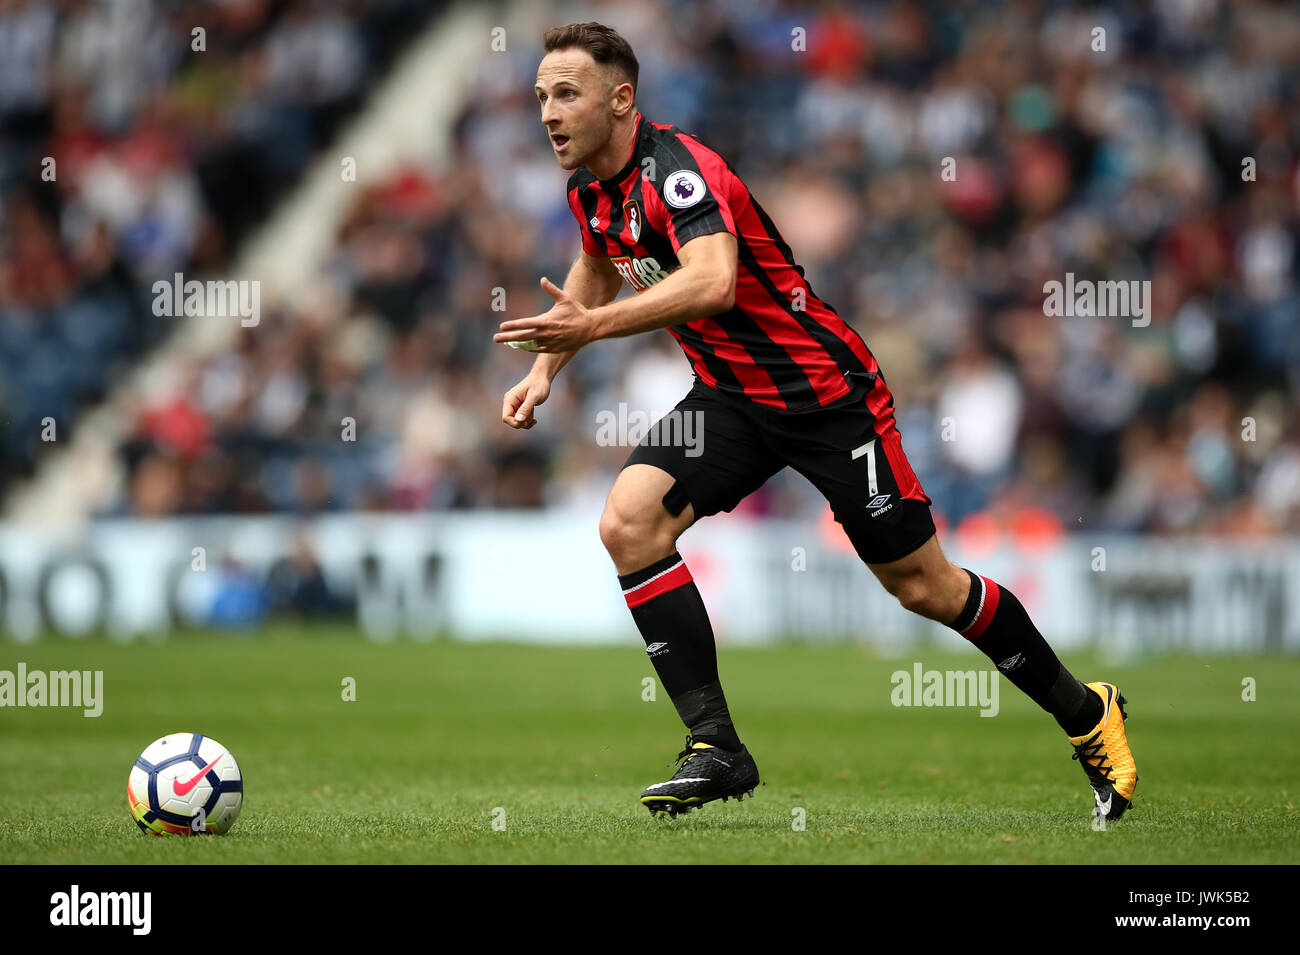 AFC Bournemouth's Marc Pugh during the Premier League match at The Hawthorns, West Bromwich. PRESS ASSOCIATION Photo. Picture date: Saturday August 12, 2017. See PA story SOCCER West Brom. Photo credit should read: Nick Potts/PA Wire. RESTRICTIONS: No use with unauthorised audio, video, data, fixture lists, club/league logos or 'live' services. Online in-match use limited to 75 images, no video emulation. No use in betting, games or single club/league/player publications. Stock Photo